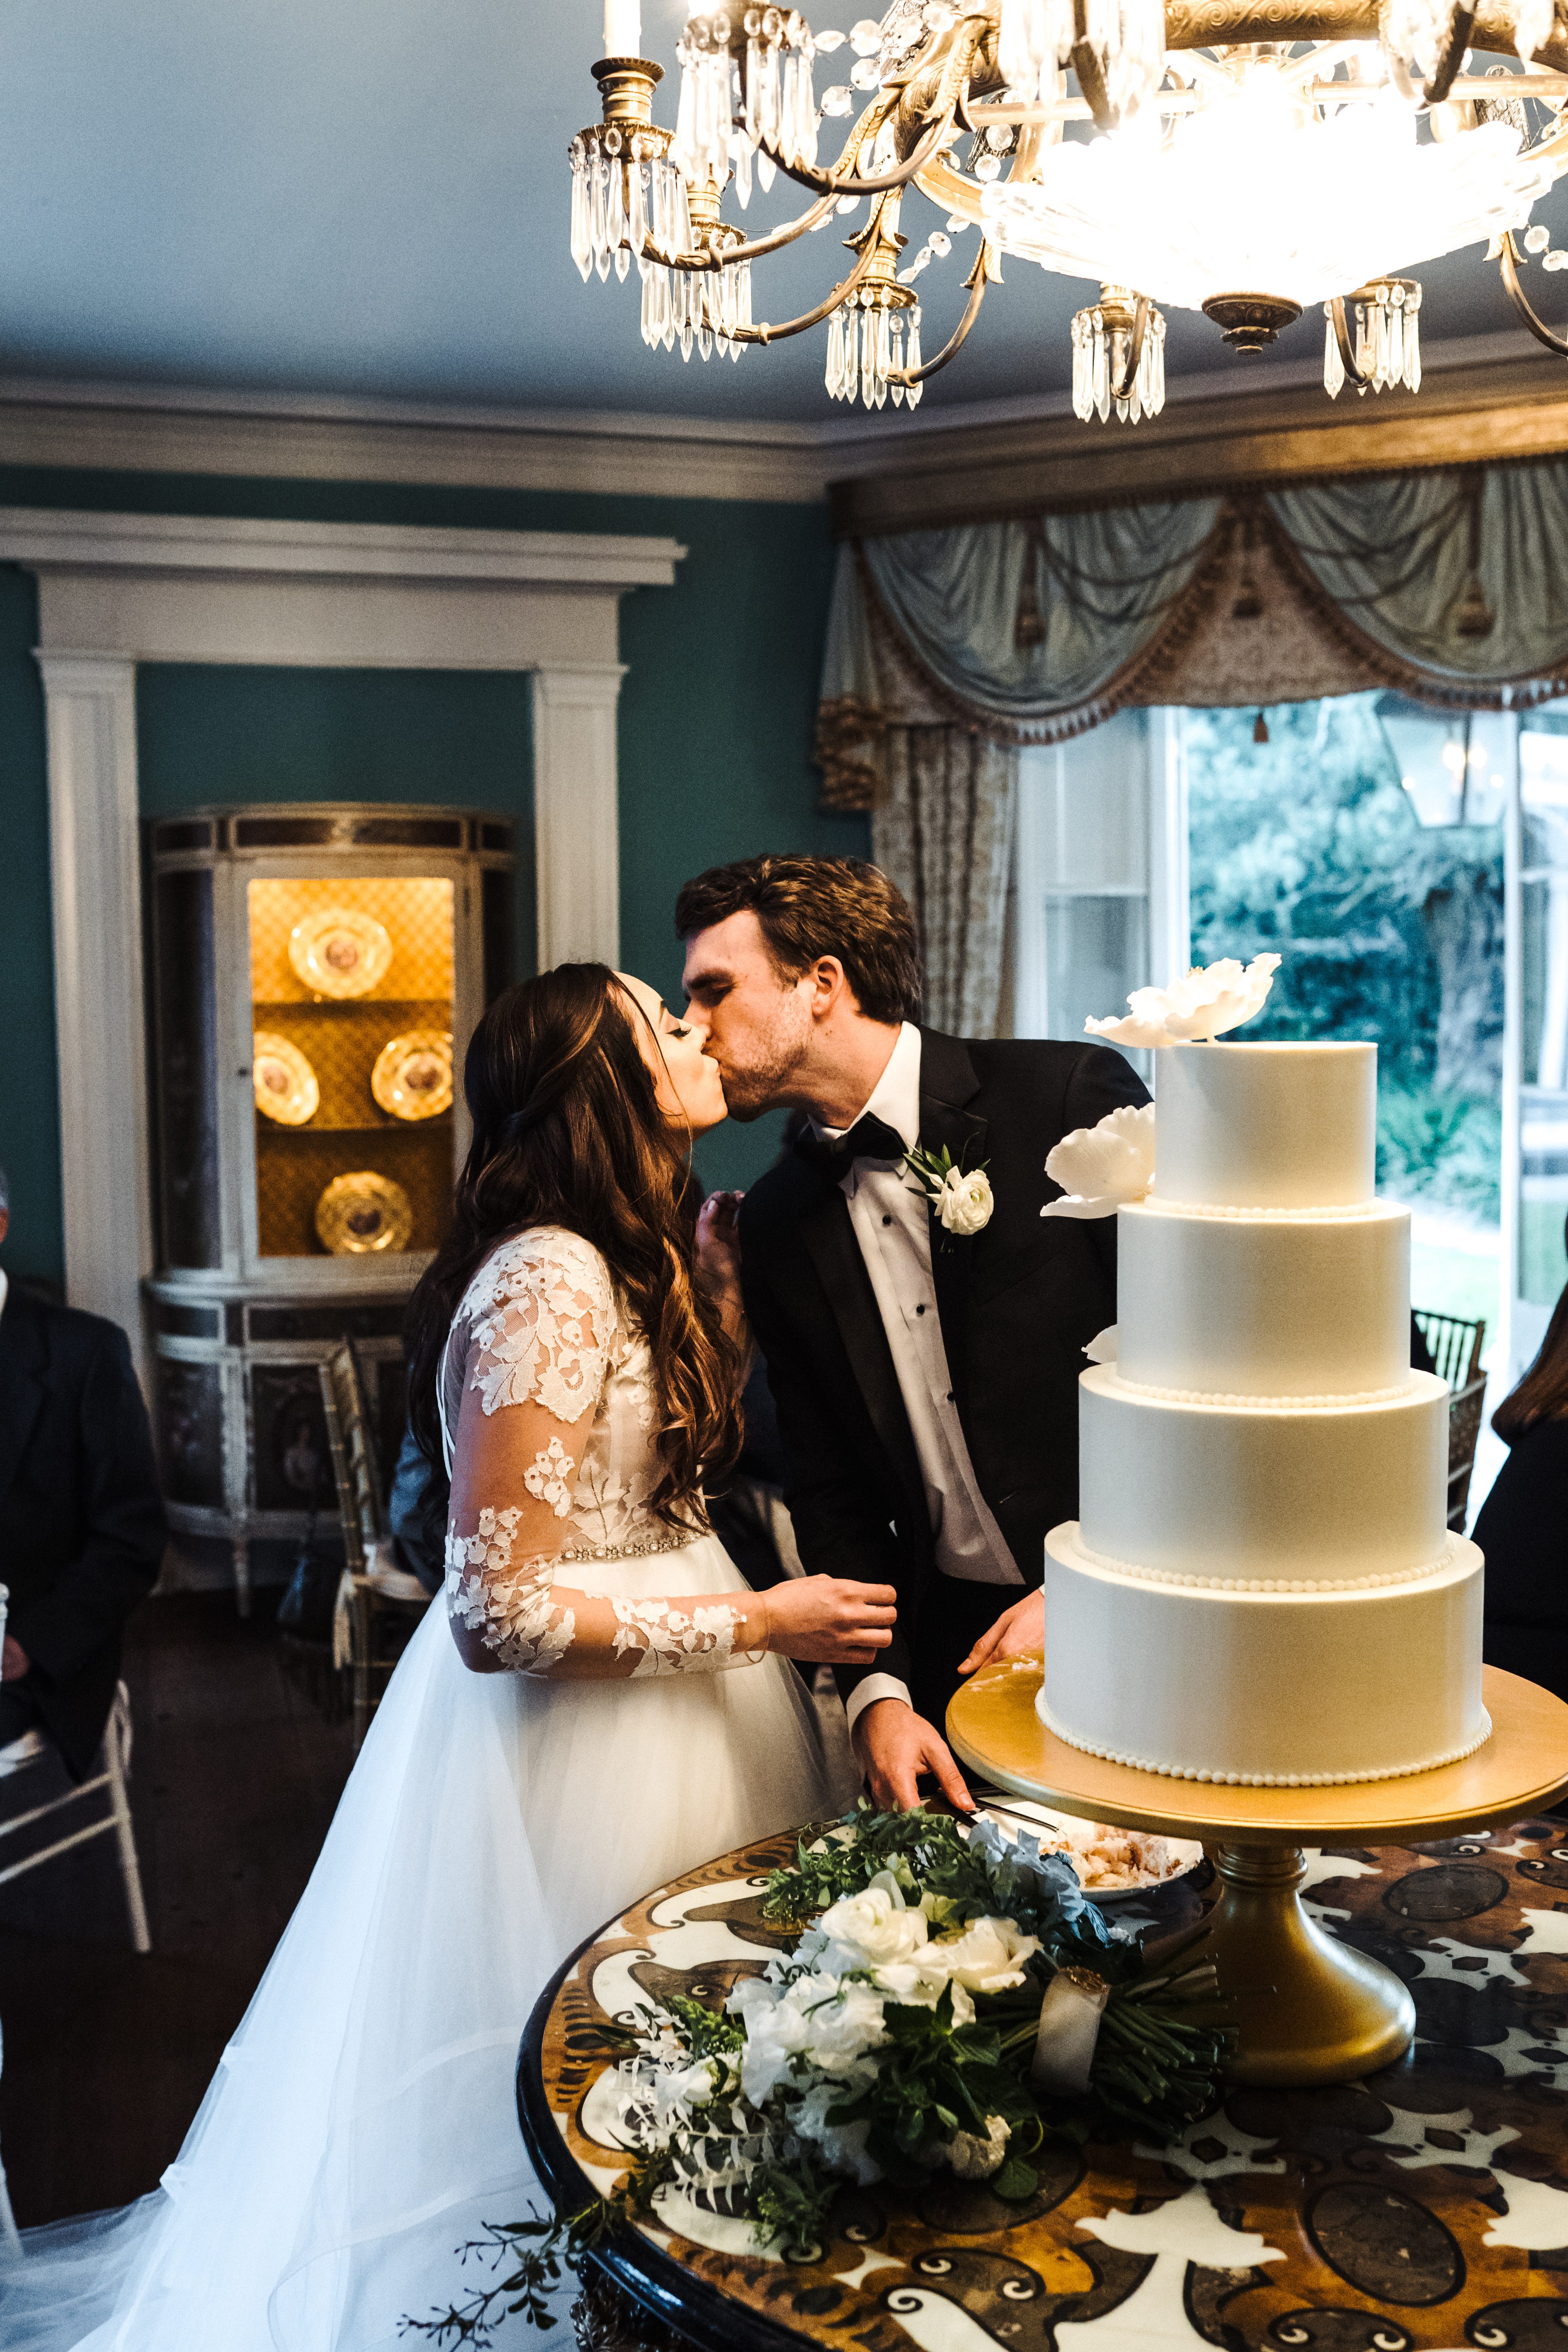 The bride and groom kiss while cutting cake at the William Aiken House Wedding